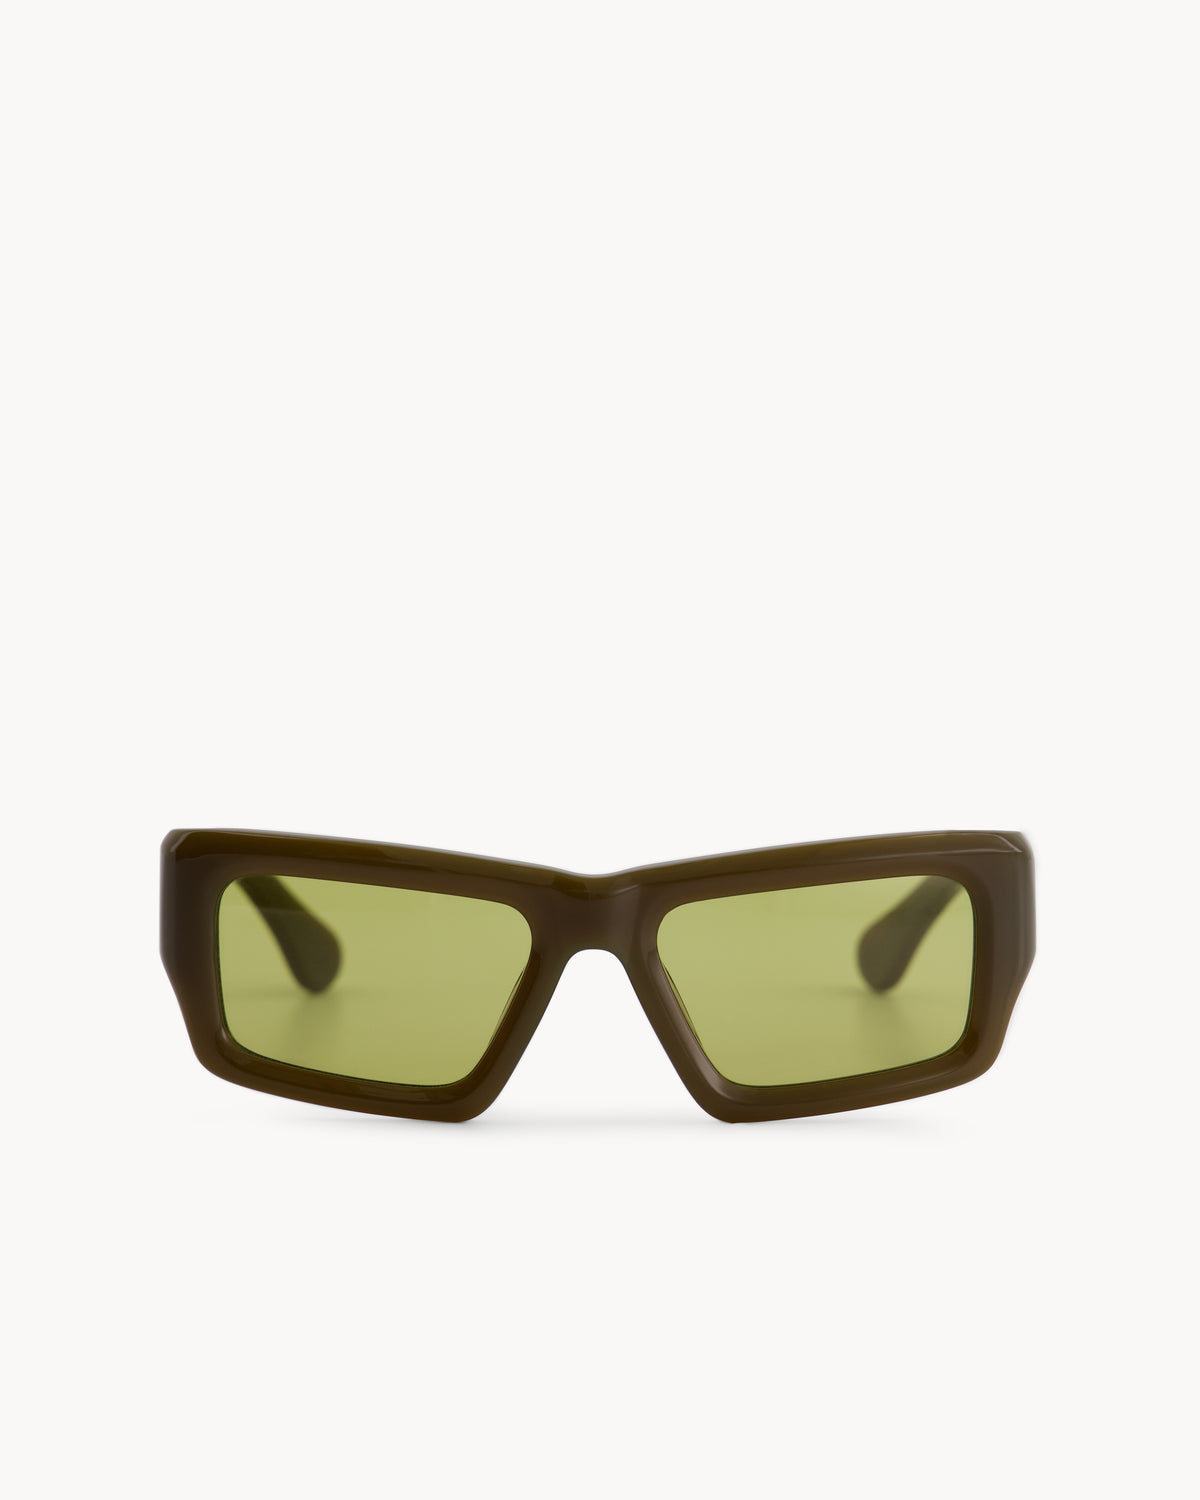 Port Tanger Sabea Sunglasses in Zaytun Acetate and Warm Olive Lenses 1